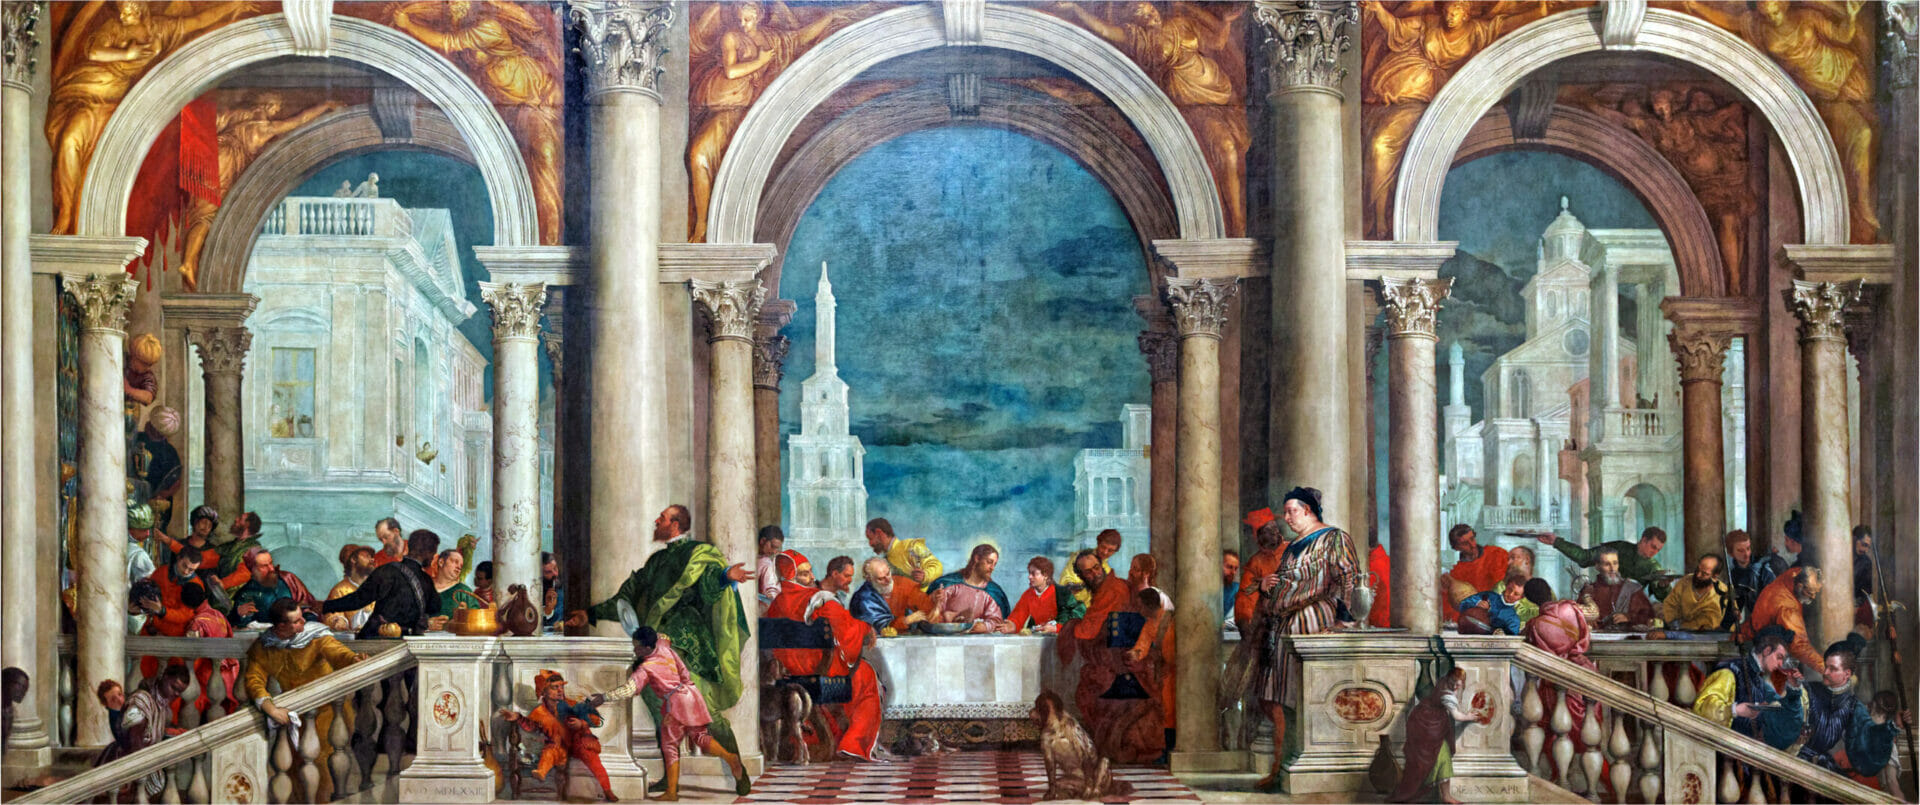 The Feast in the House of Levi - The colorful and crowded scene